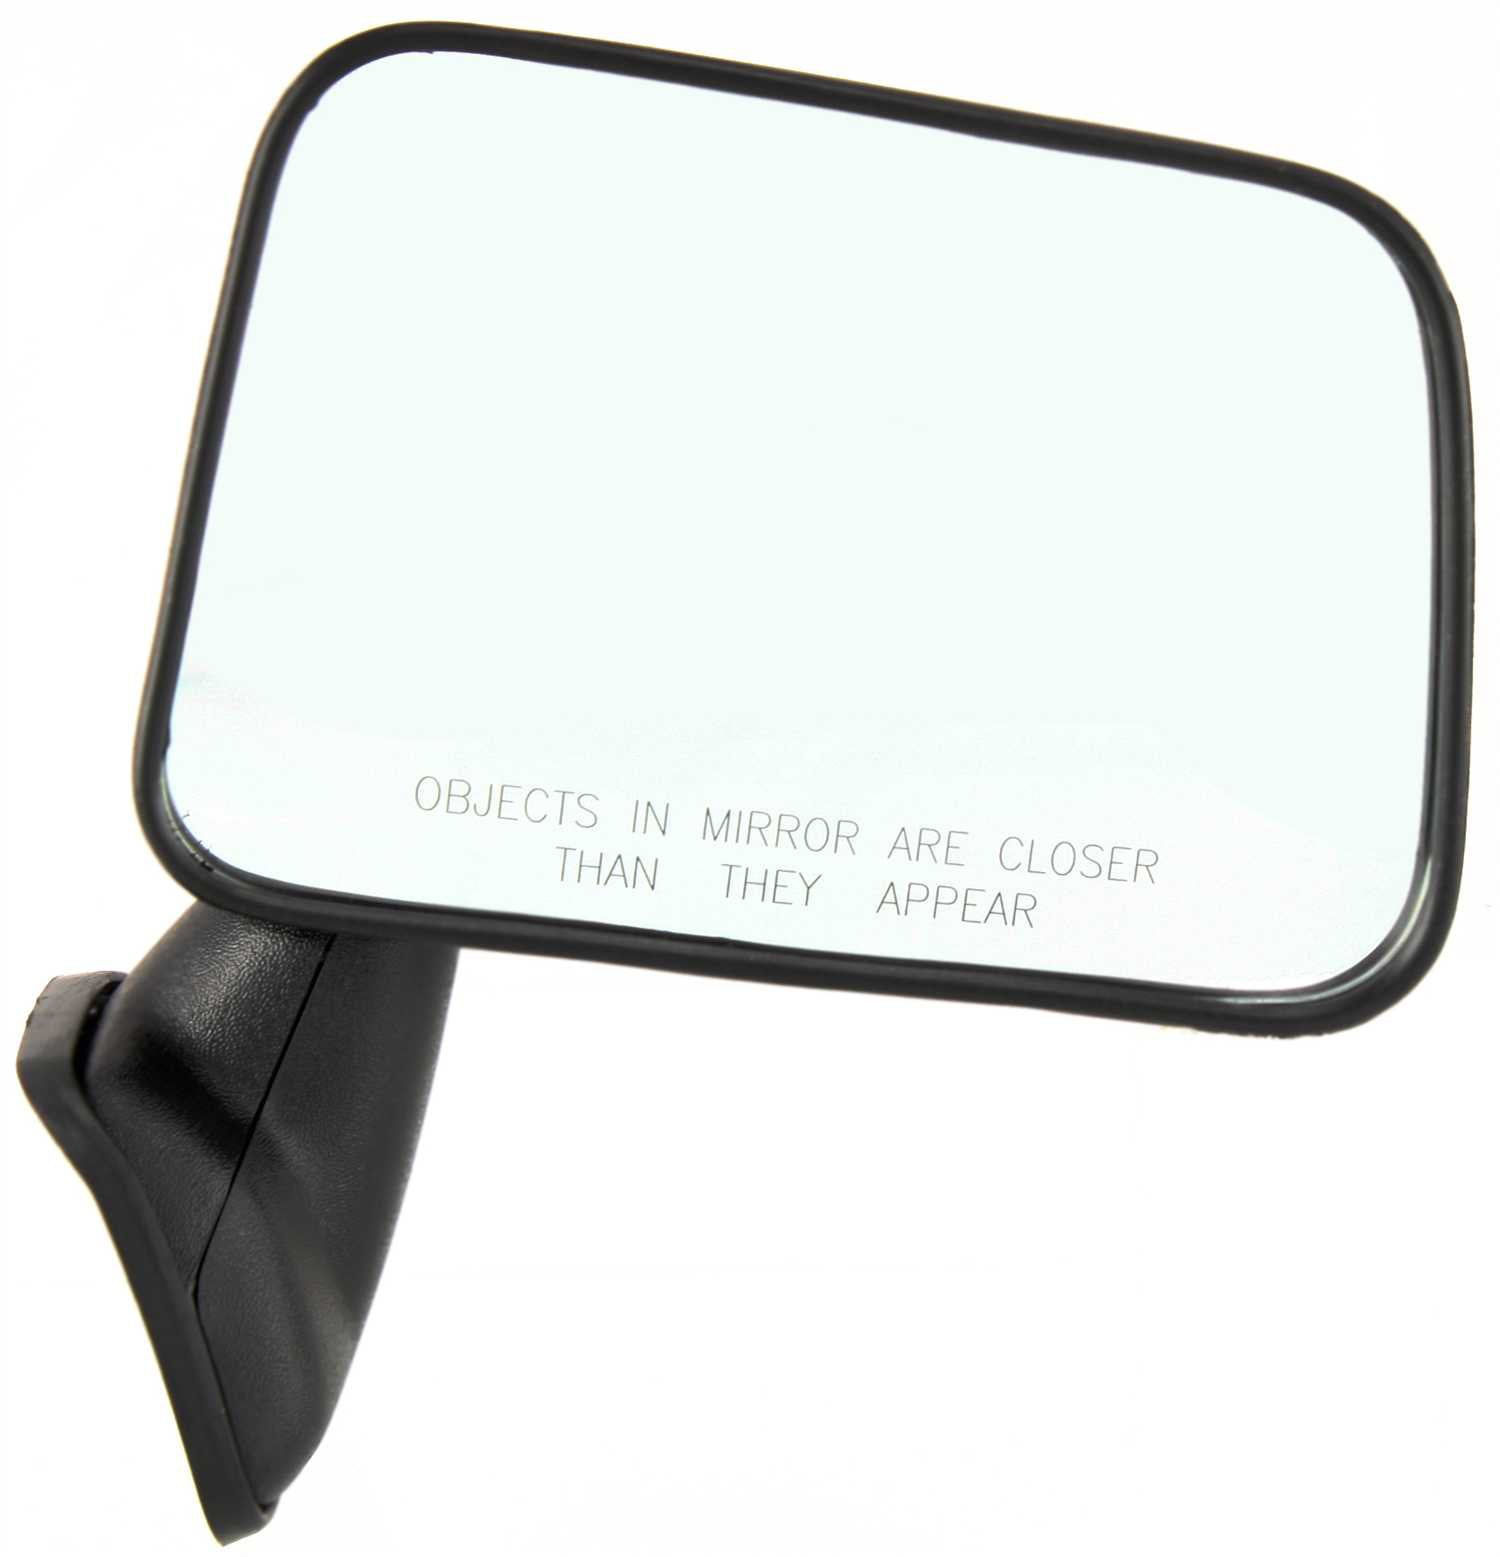 NEW LH MANUAL MIRROR FOR 84-89 TOYOTA 4RUNNER PICKUP 2WD 4WD TO1320106 